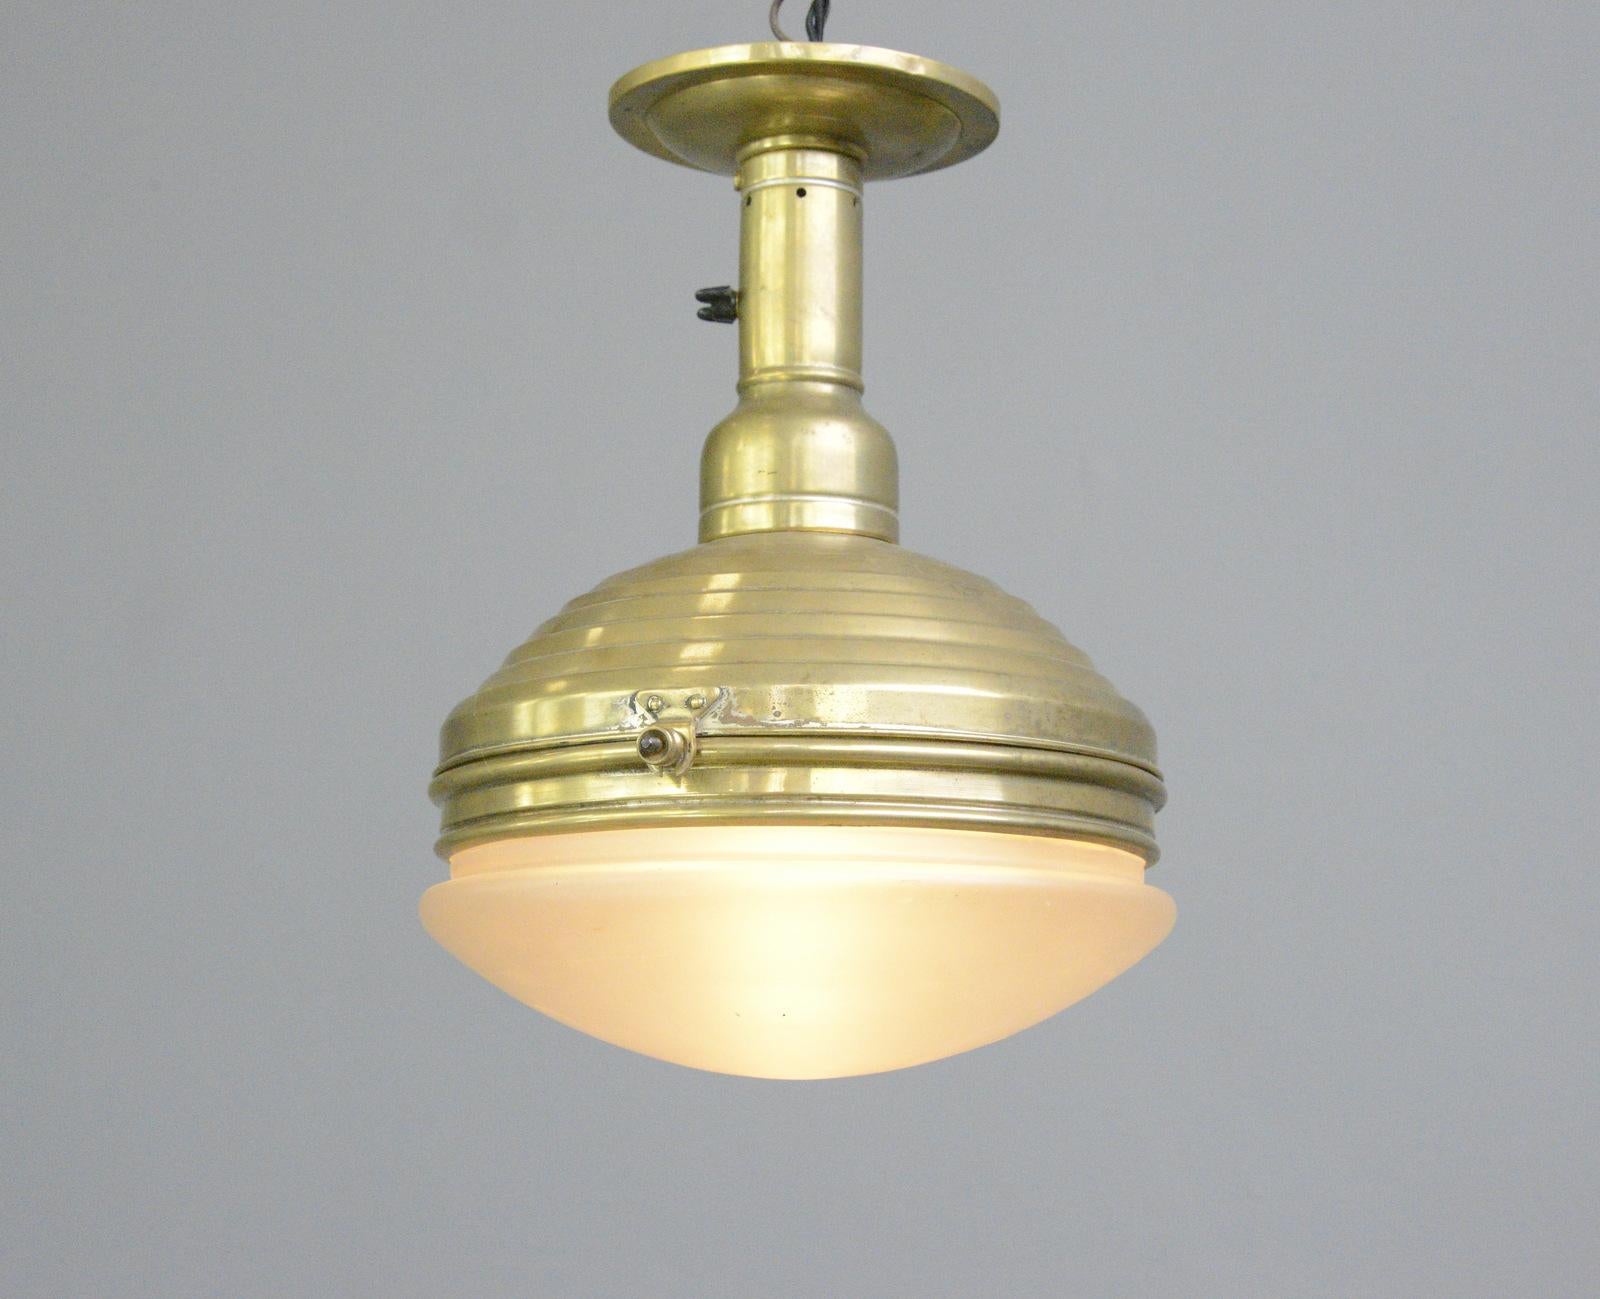 Early 20th Century Brass Ceiling Light by Carl Zeiss Jena Circa 1920s